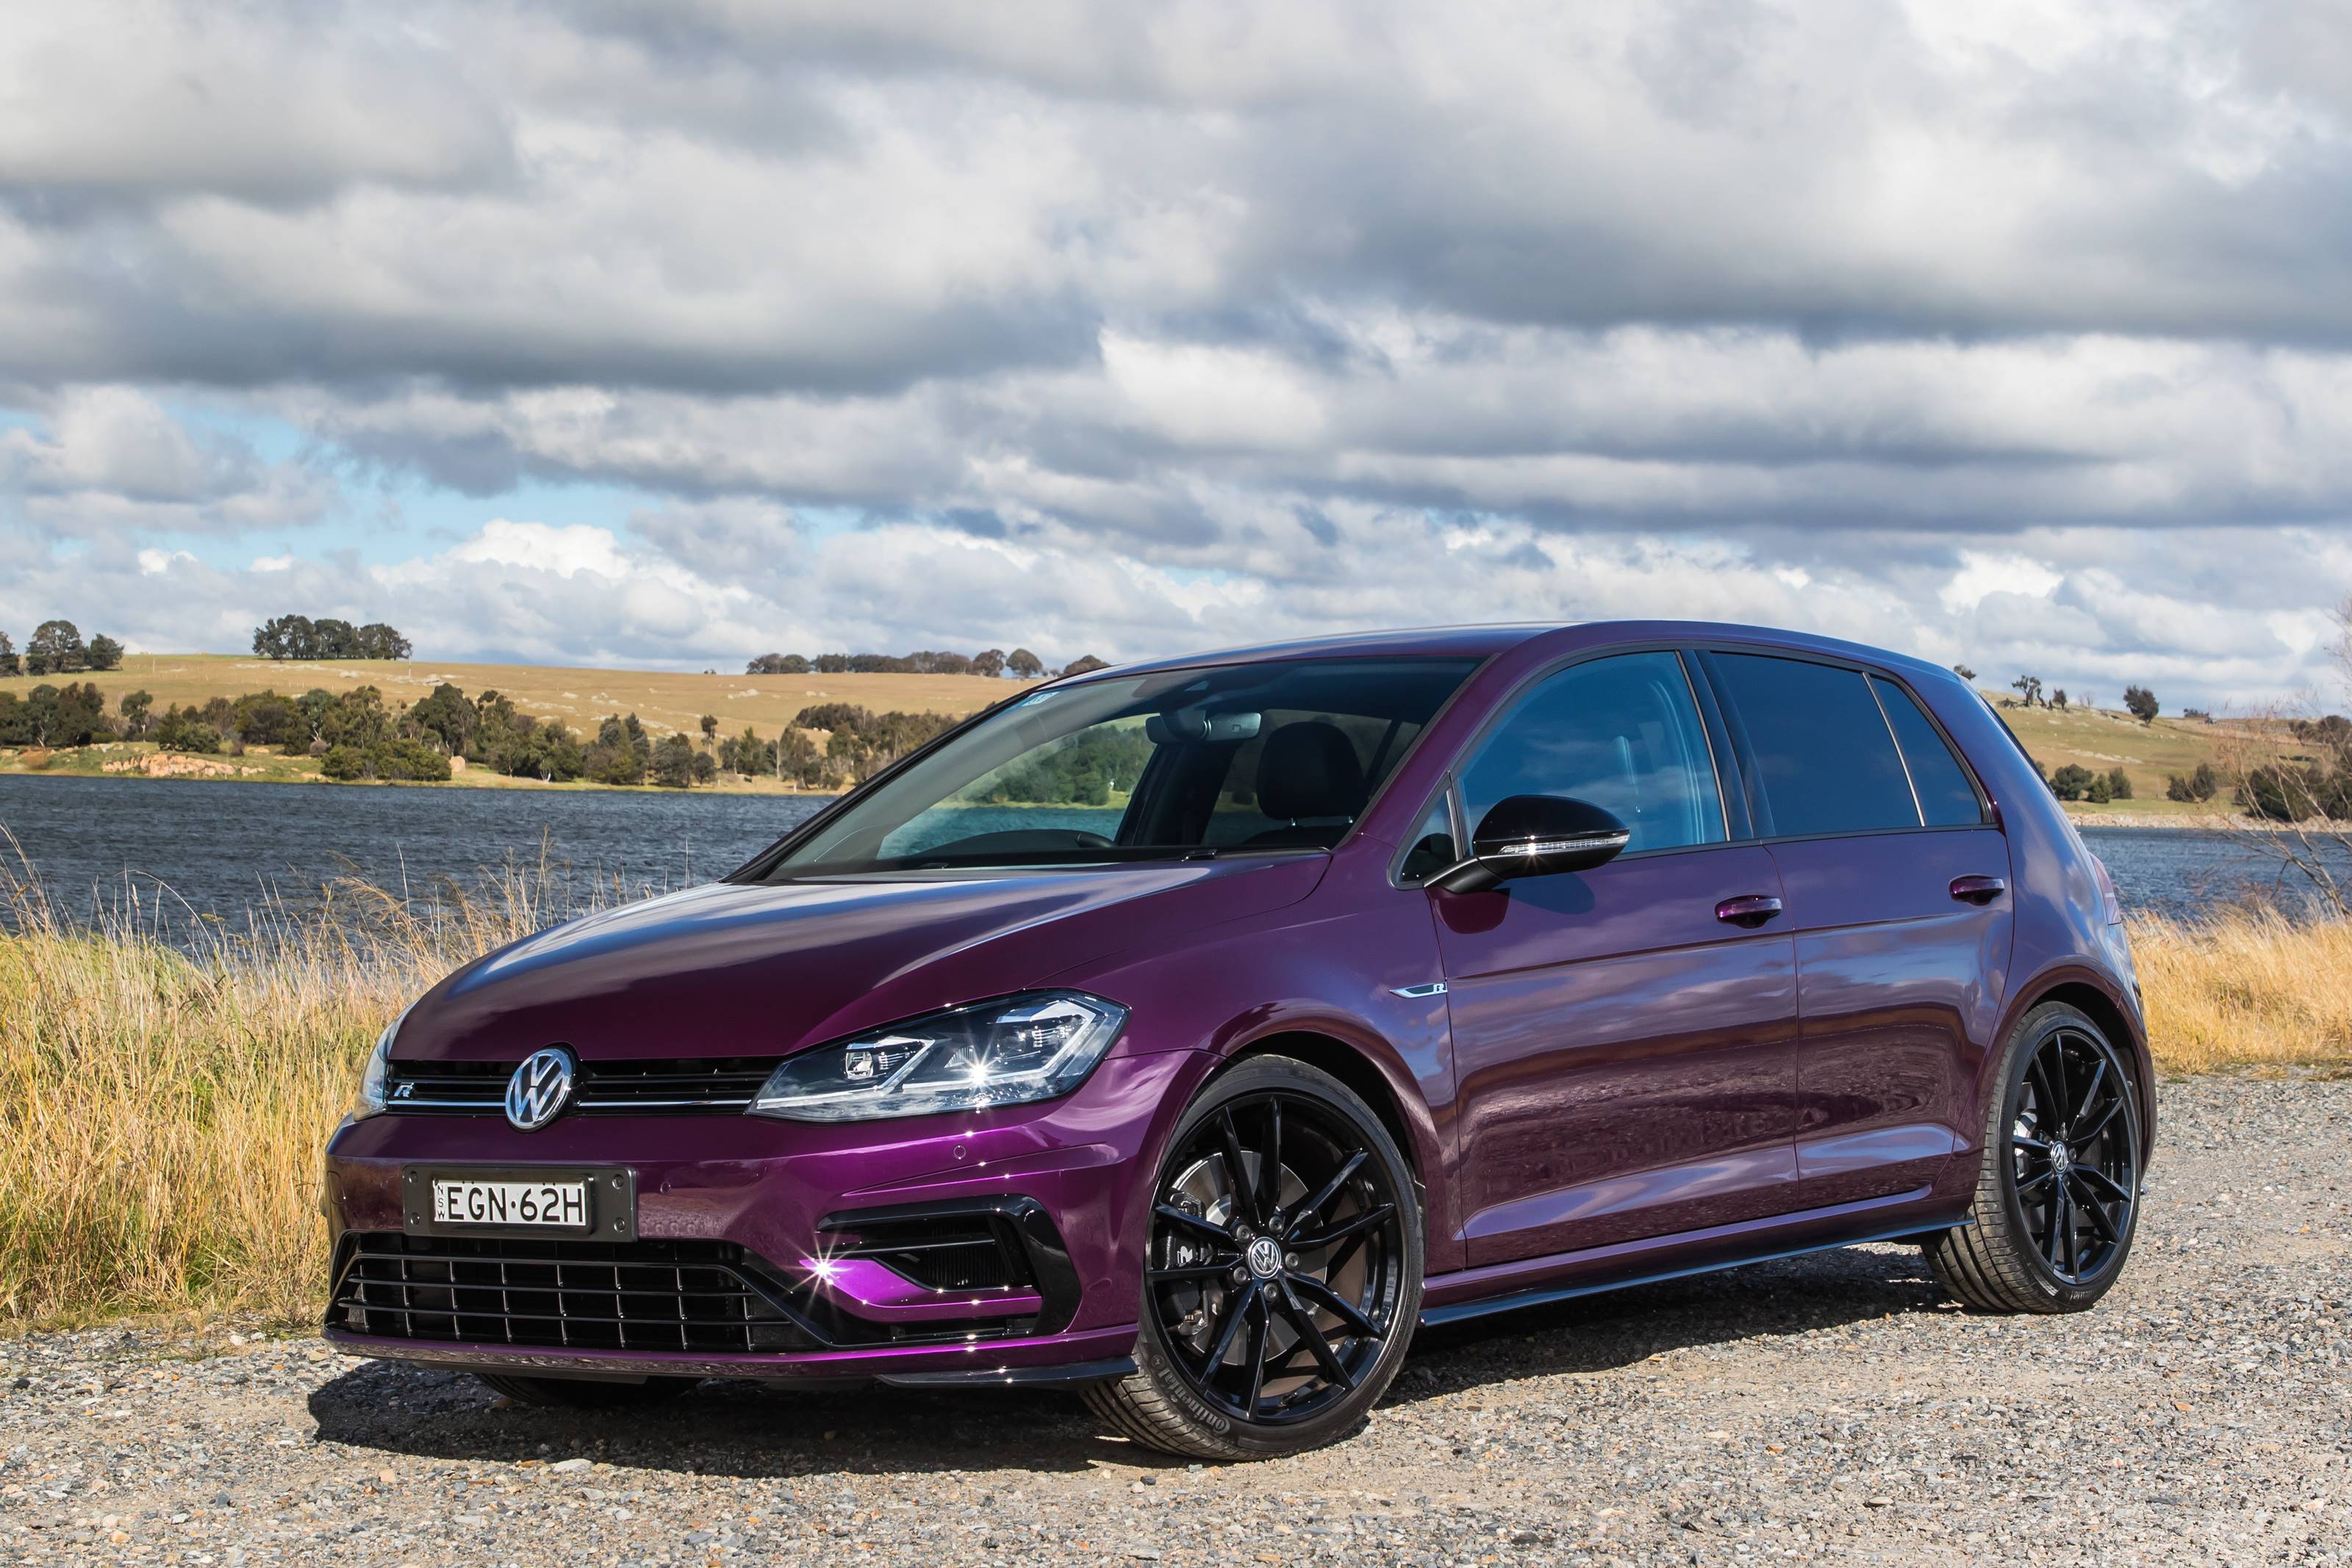 2020 Volkswagen Golf R Final Edition, available in factory hand painted custom colours: Victory Blue; Viper Green metallic (recalling the Scirocco R); and Violet Touch Pearlescent.